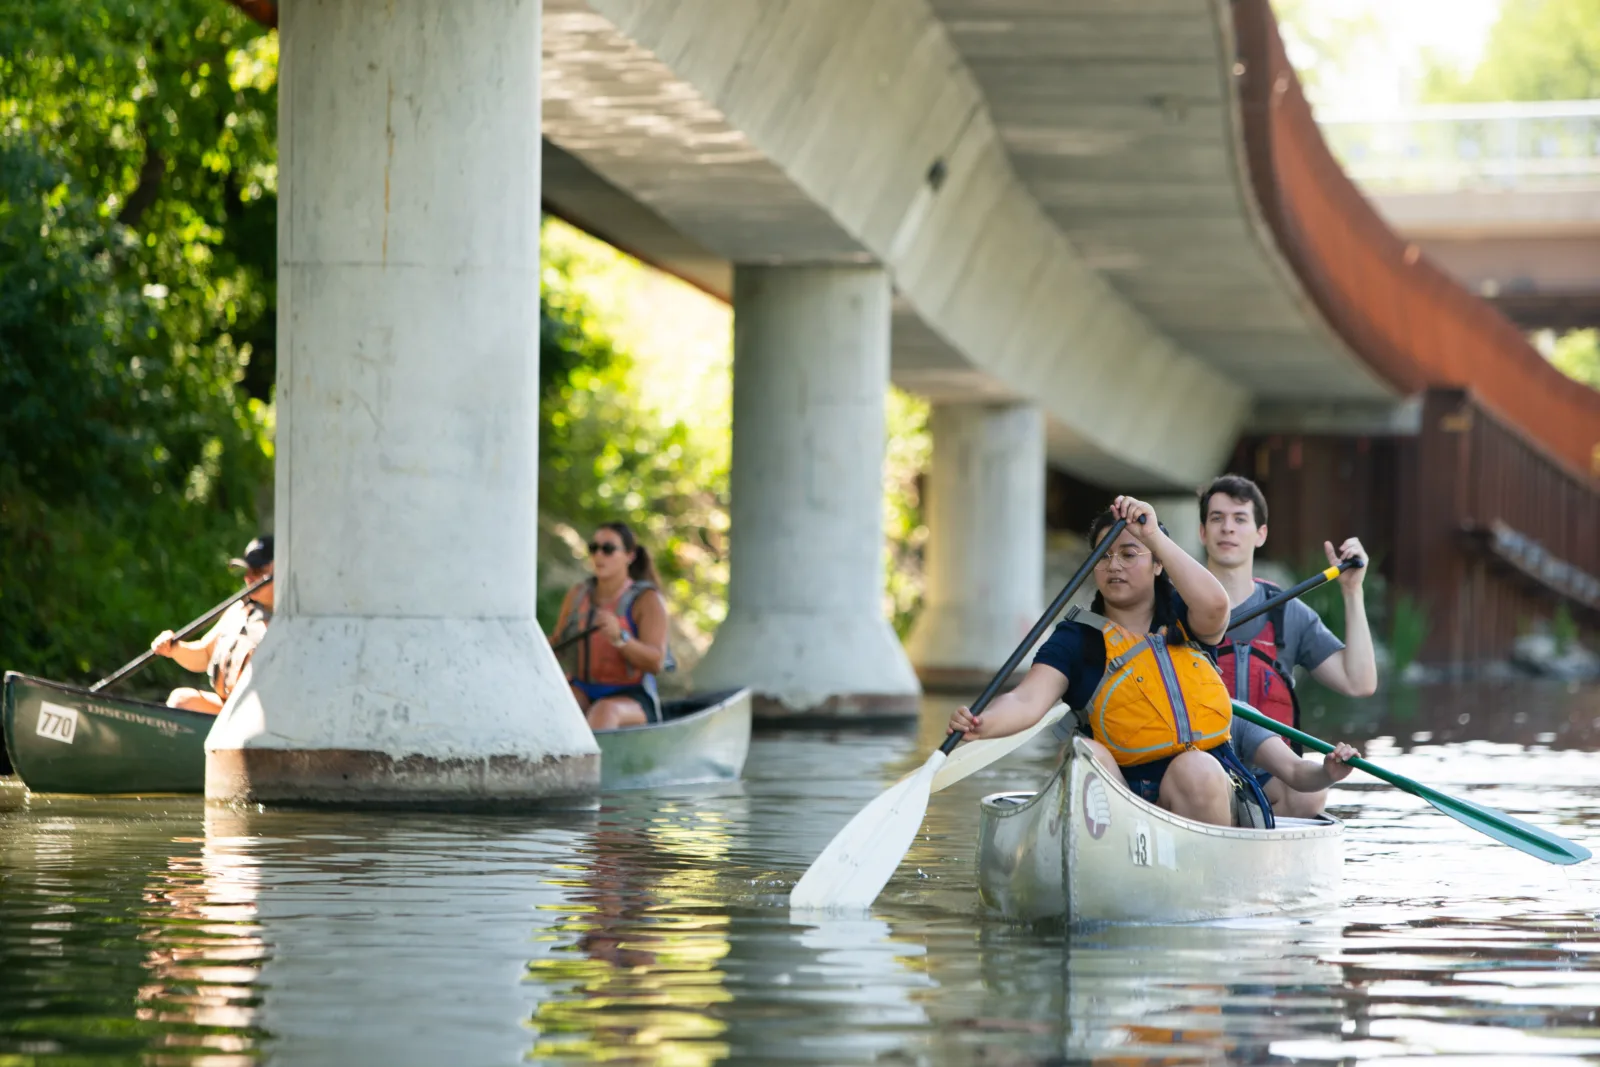 NCAIS participants paddle down the Chicago River. Behind them are large concrete poles and highways characteristic of the city's urban landscape.